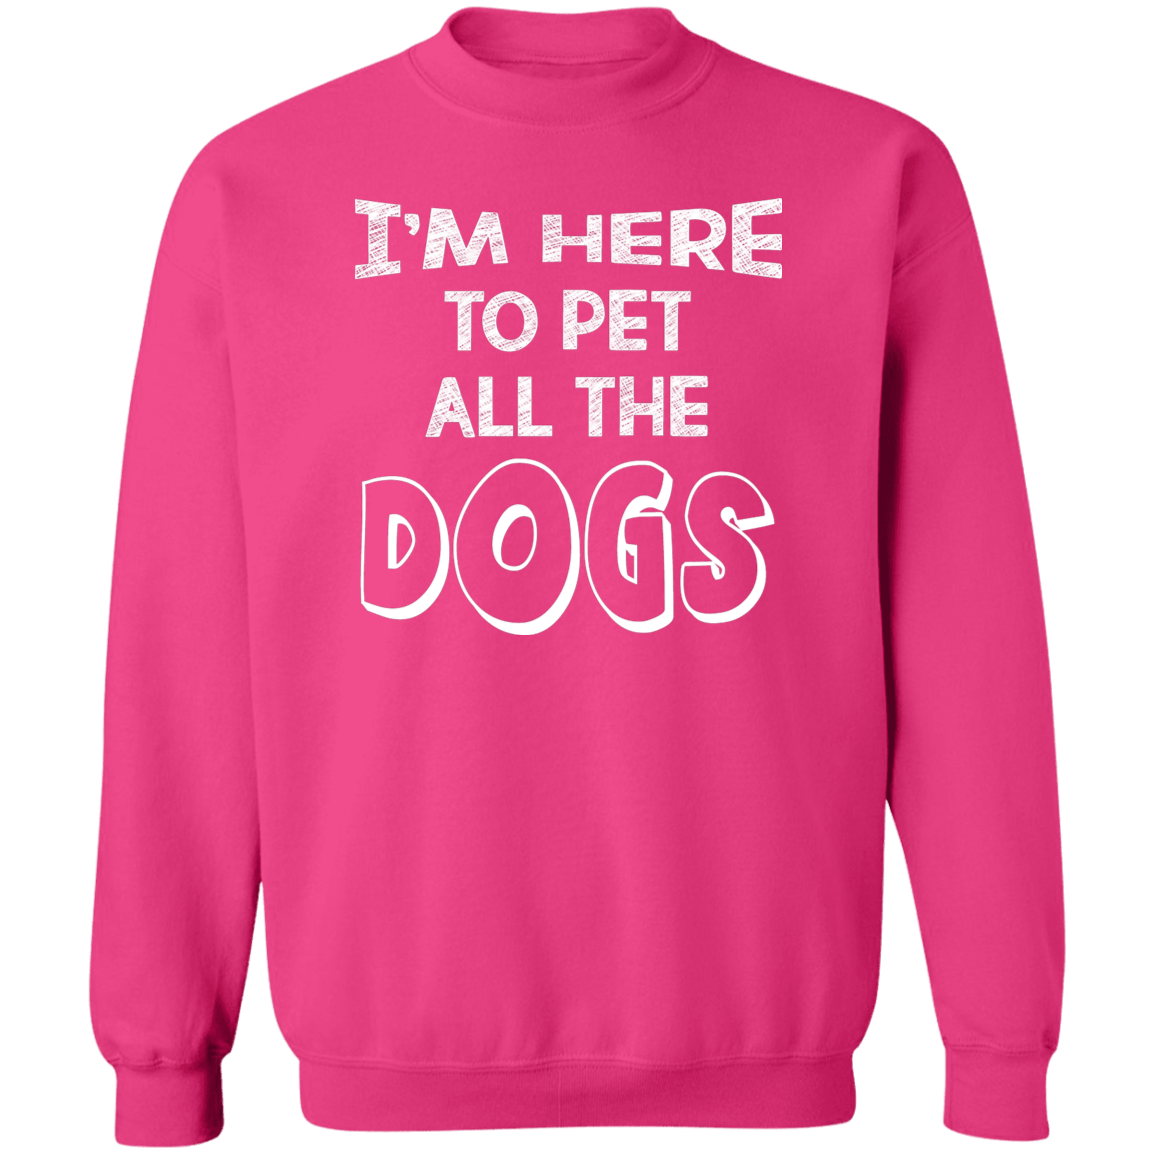 I'm Here To Pet All The Dogs - Sweatshirt.